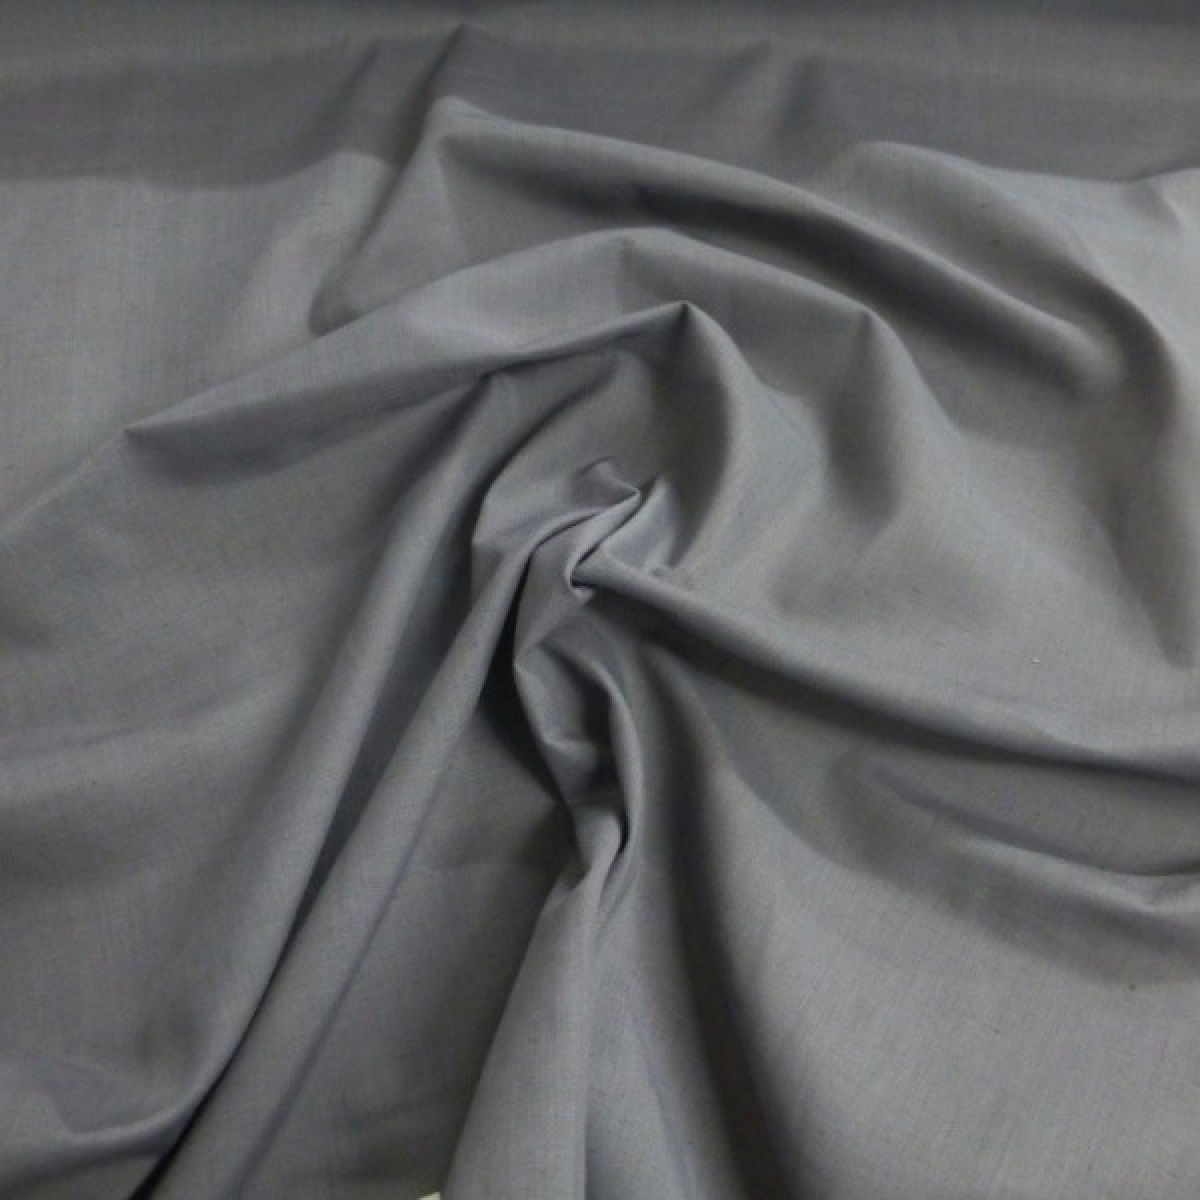 DARK GREY Poly Cotton fabric material plain colour sold by the metre 115cm wide